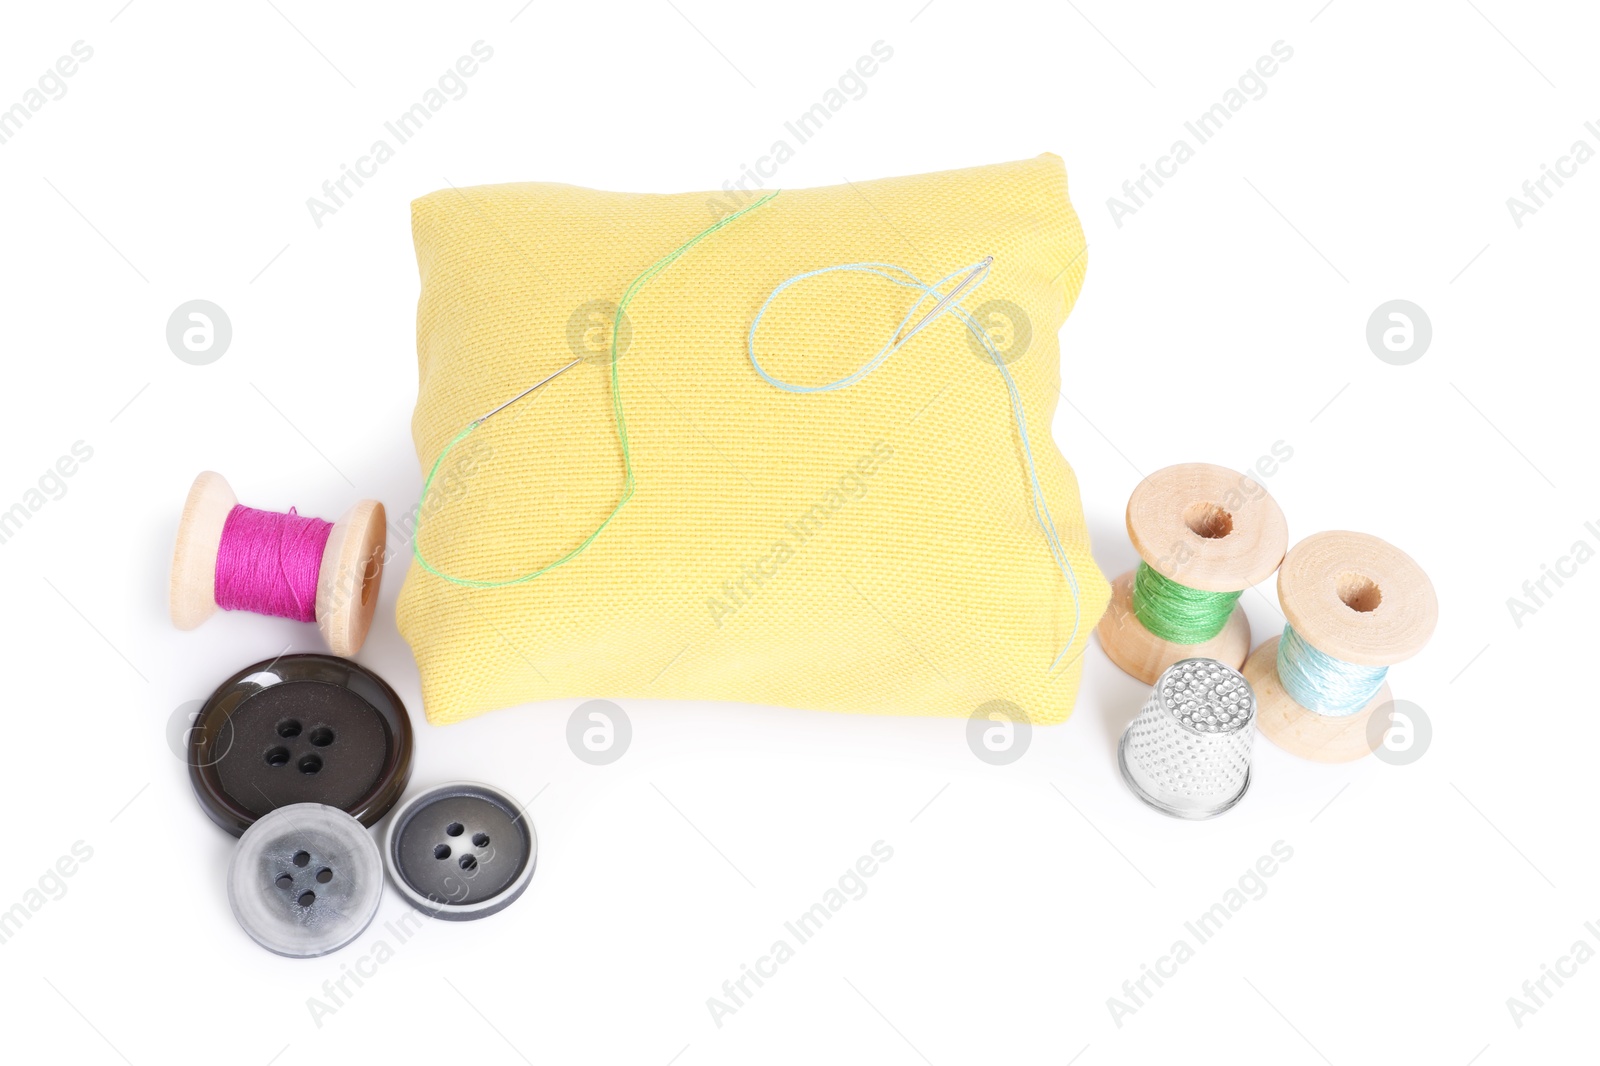 Photo of Pincushion, sewing needles, spools of threads, buttons and thimble isolated on white